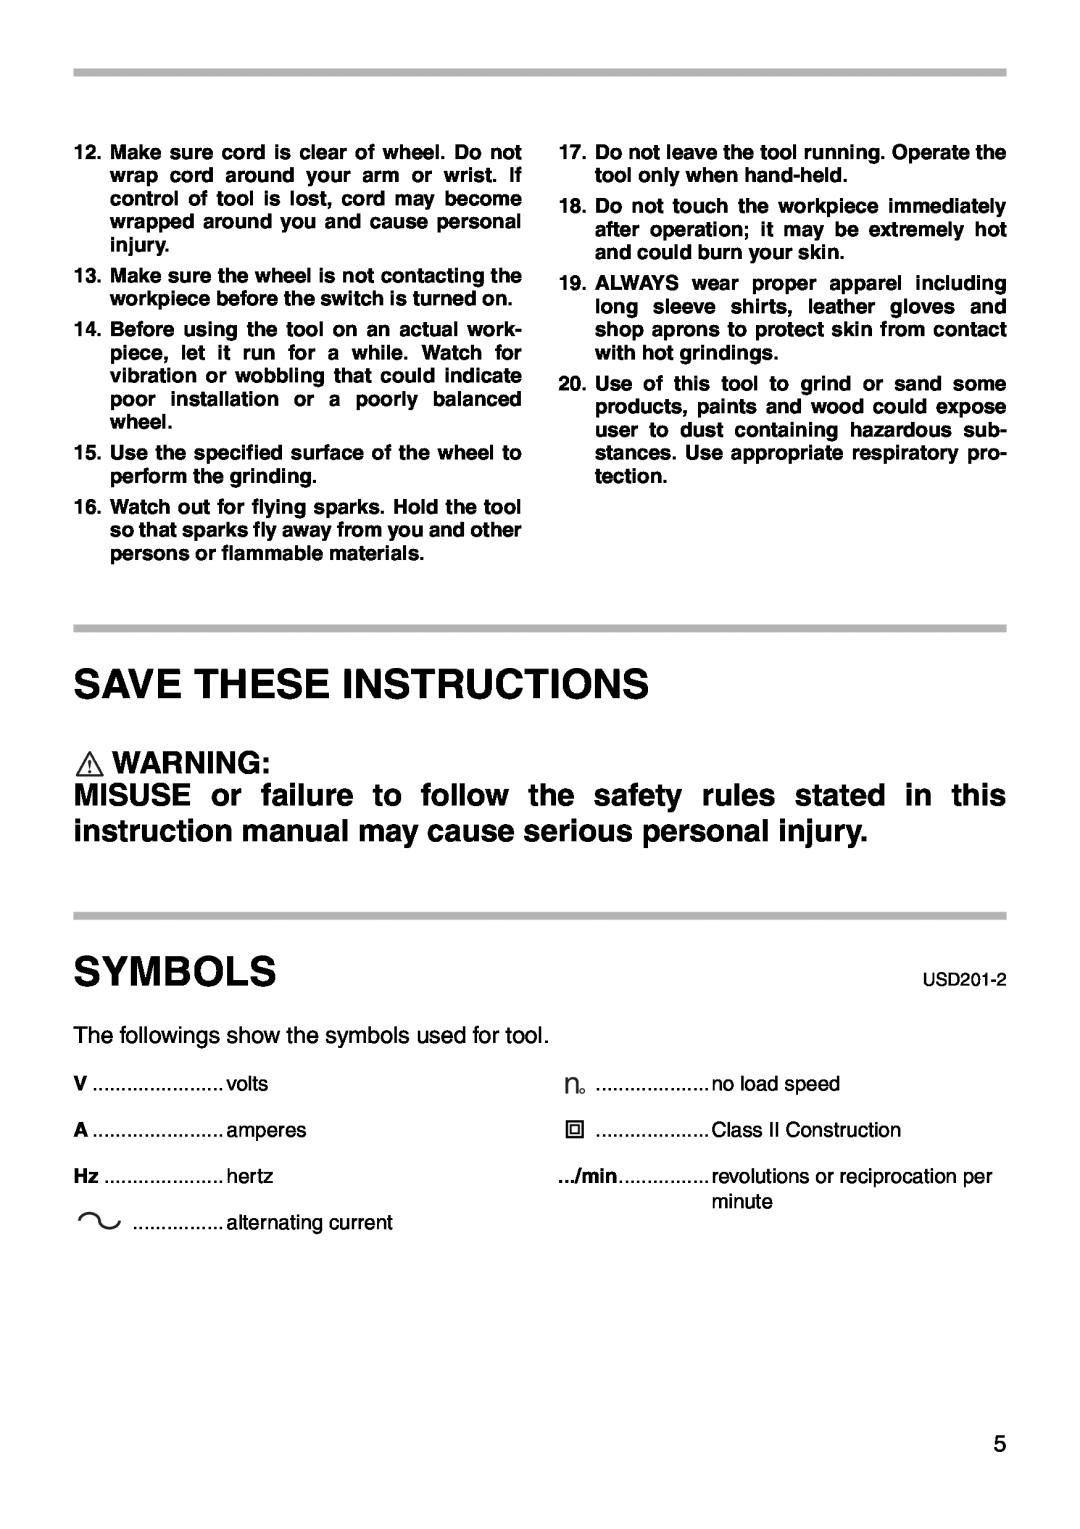 Makita 9566CV instruction manual Symbols, Save These Instructions, The followings show the symbols used for tool 